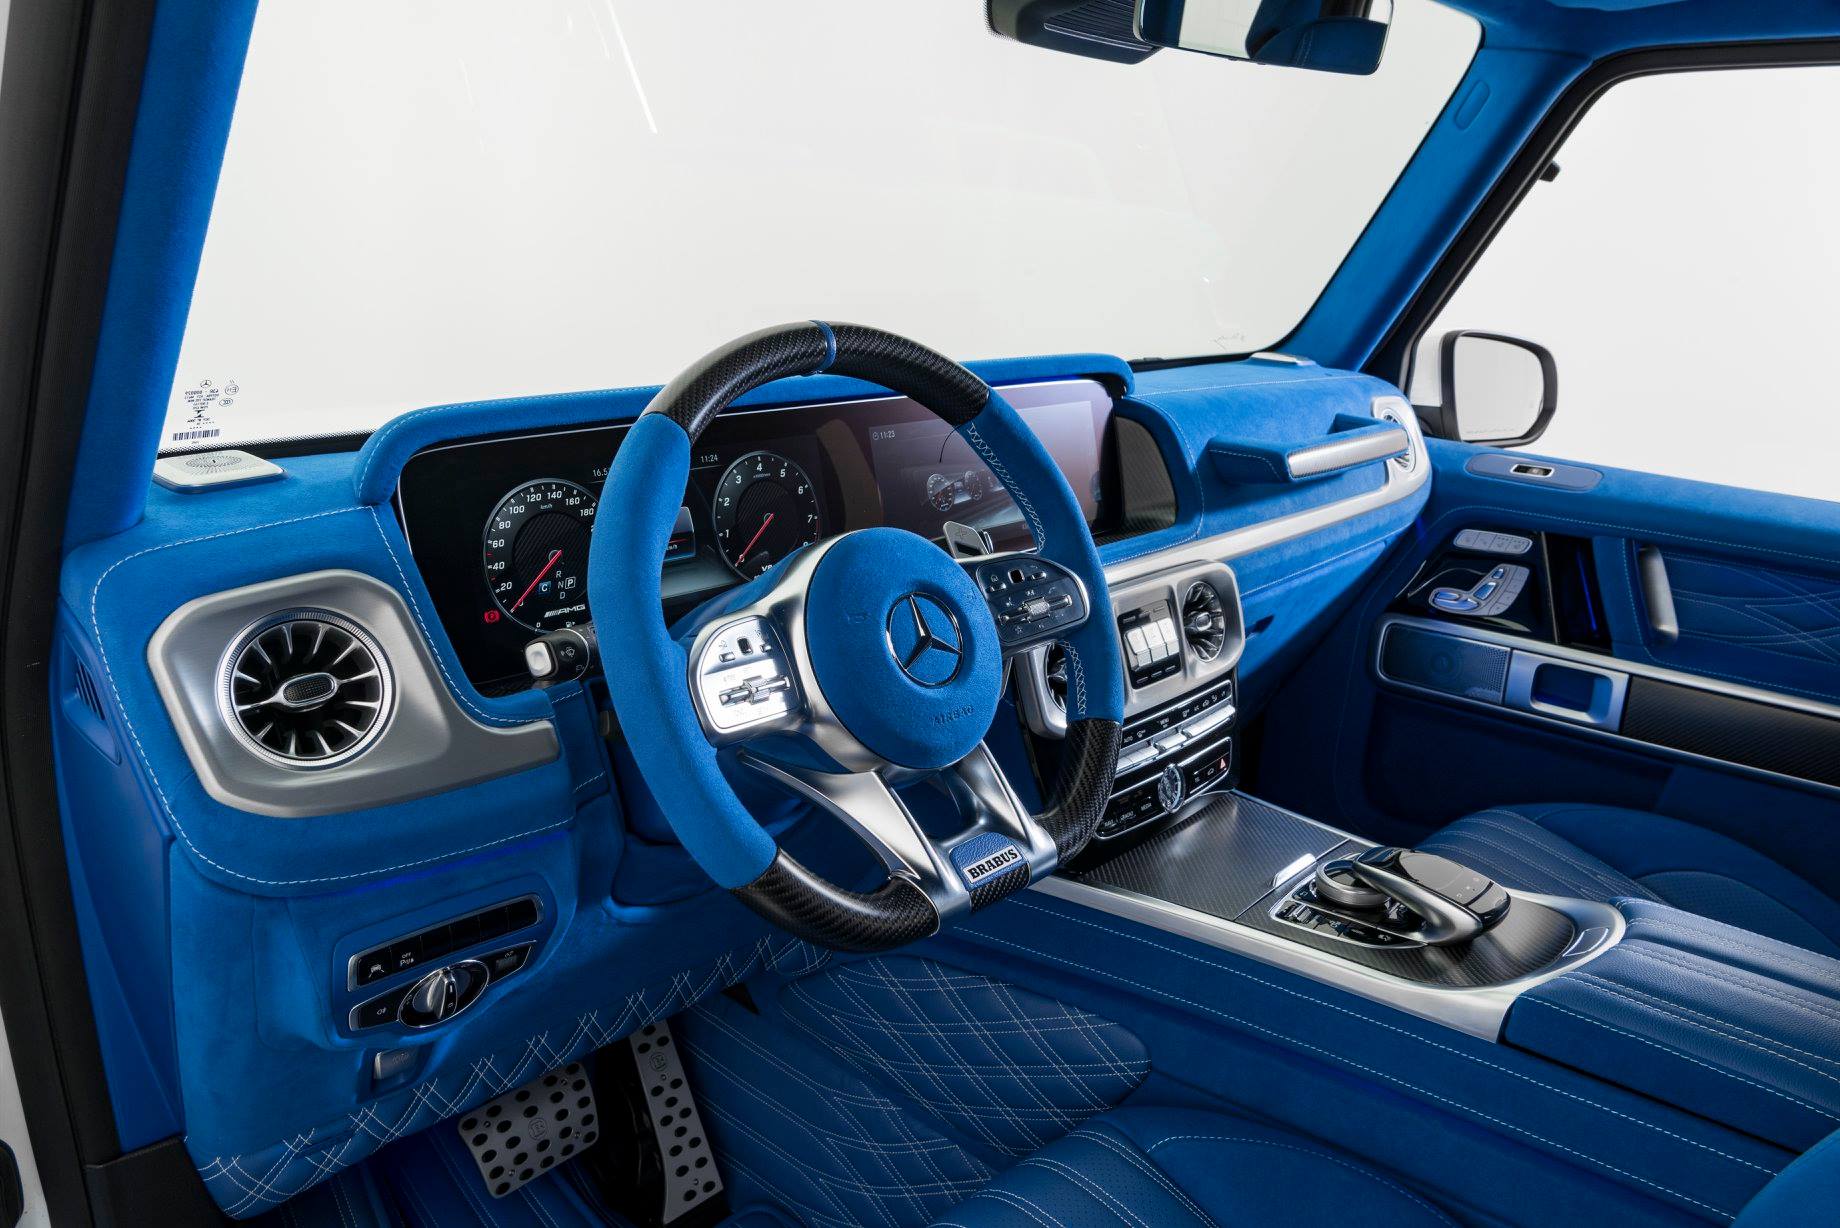 2019 Mercedes Amg G63 Looks Amazing In Brabus Blue Leather